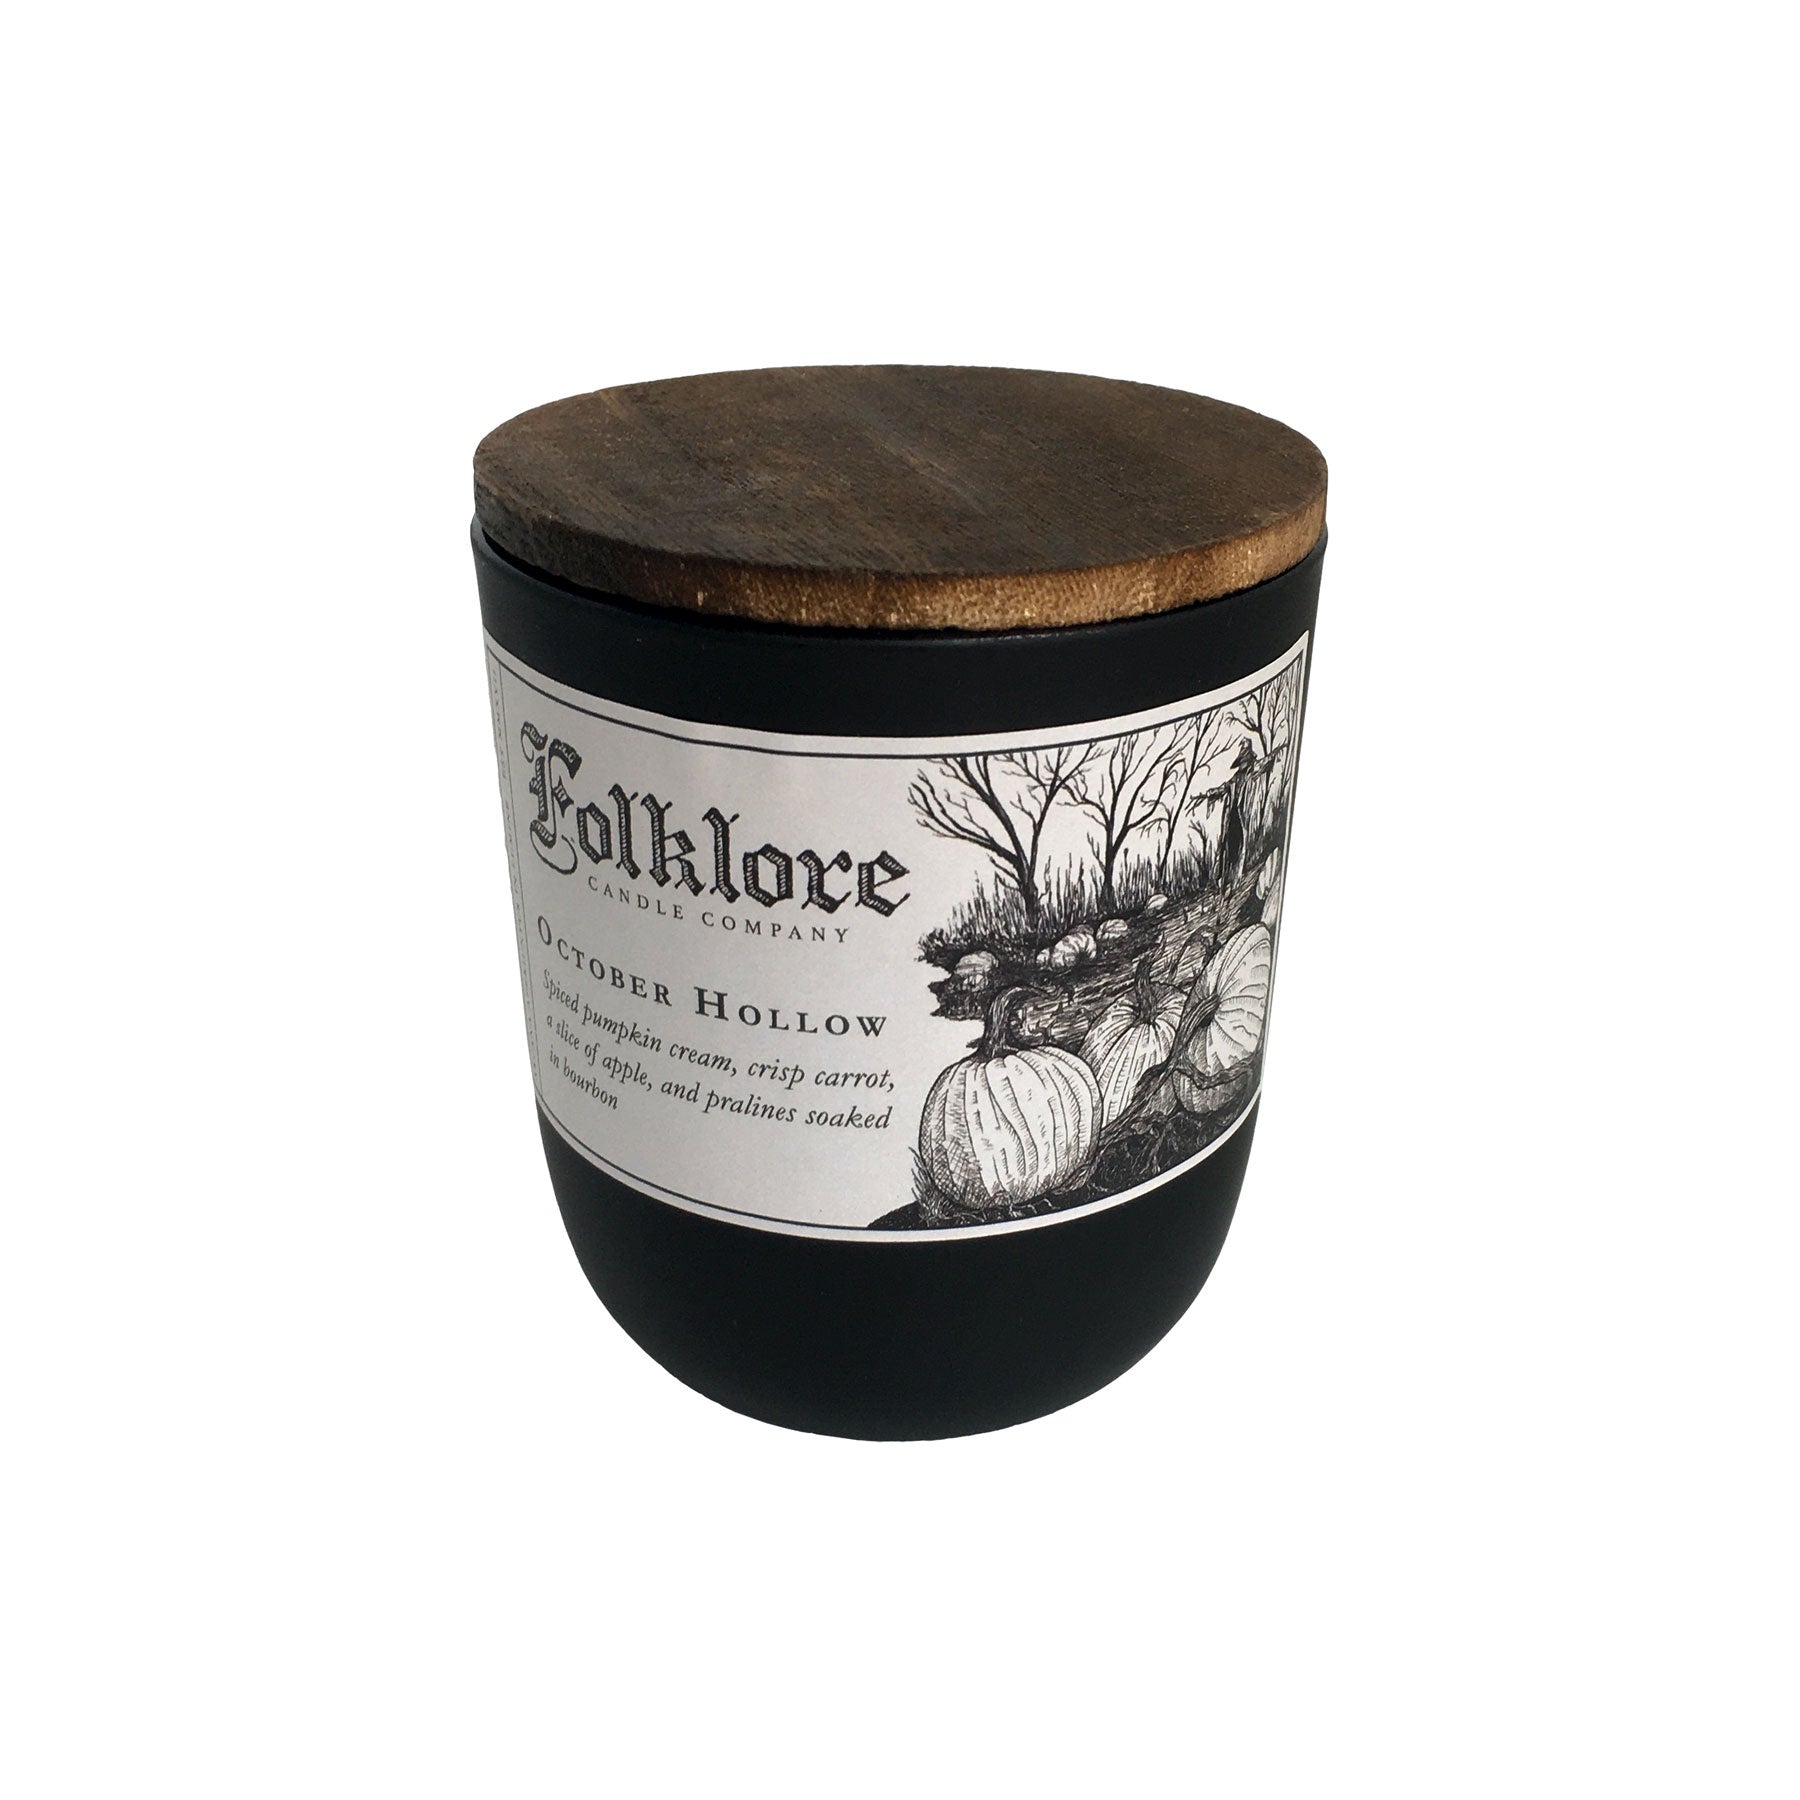 October Hollow - Folklore Candle Company